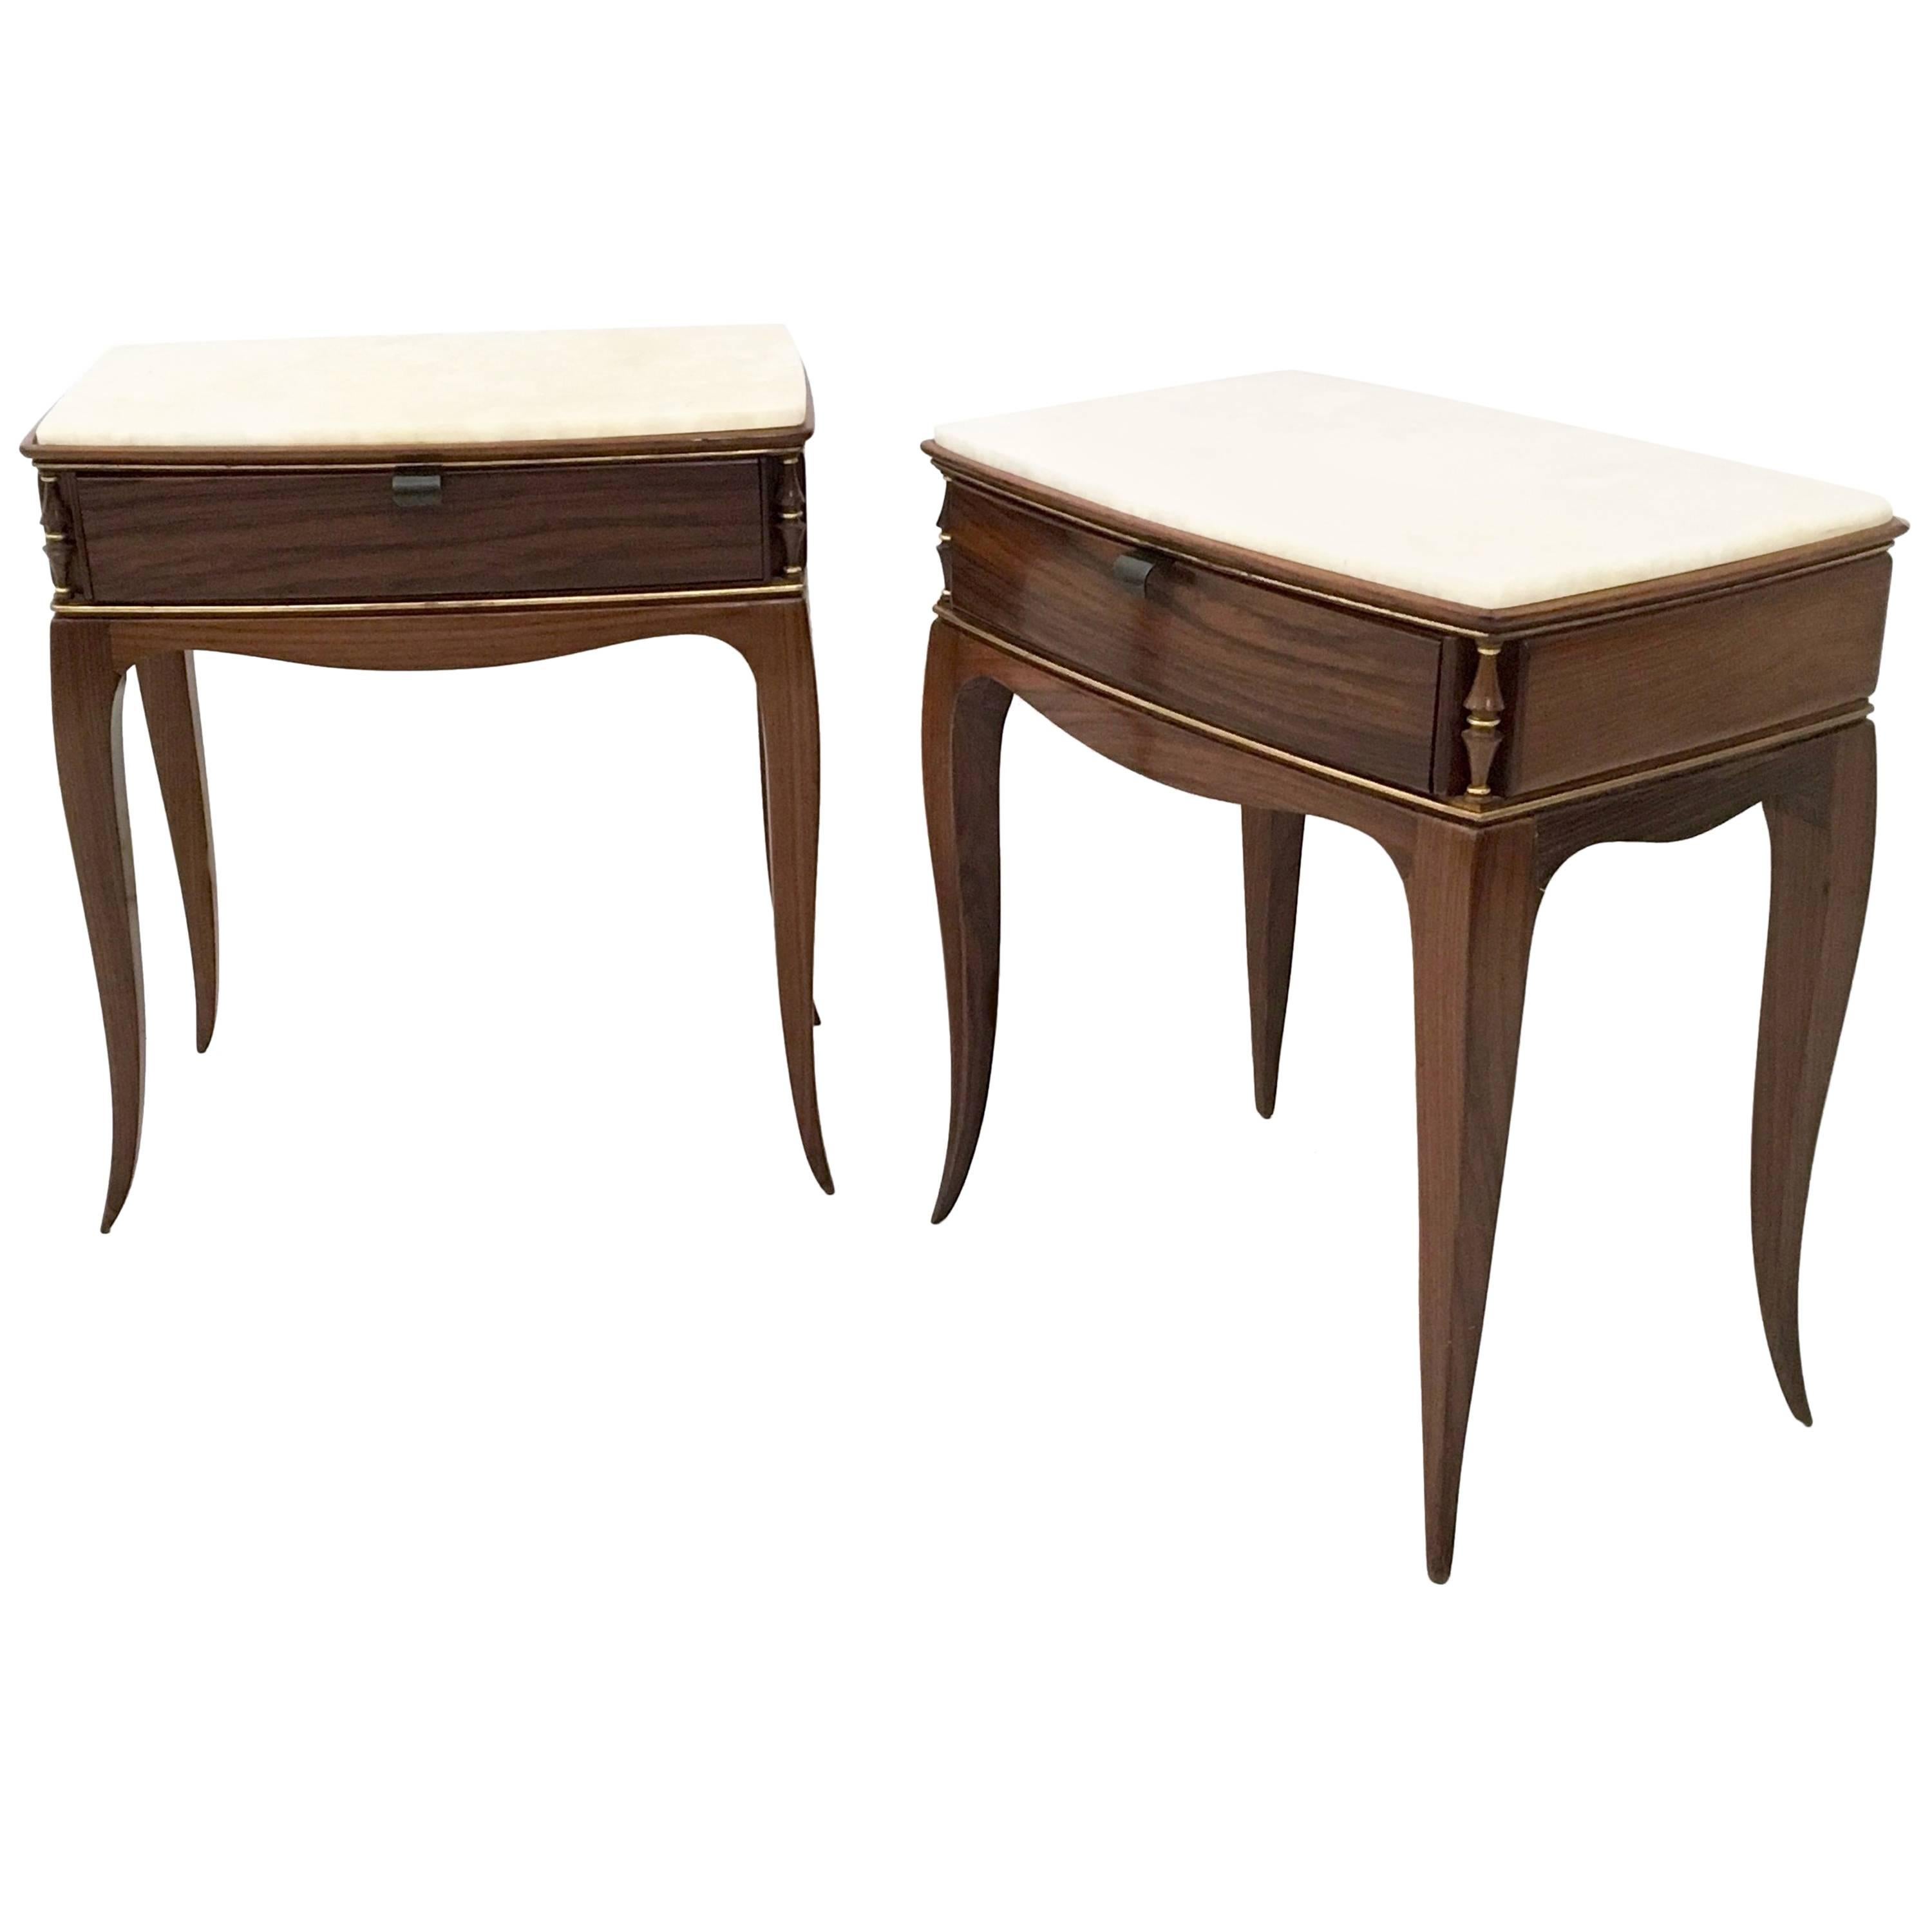 Pair of Beautiful Rosewood and Onyx Bedside Tables, Italy, 1950s